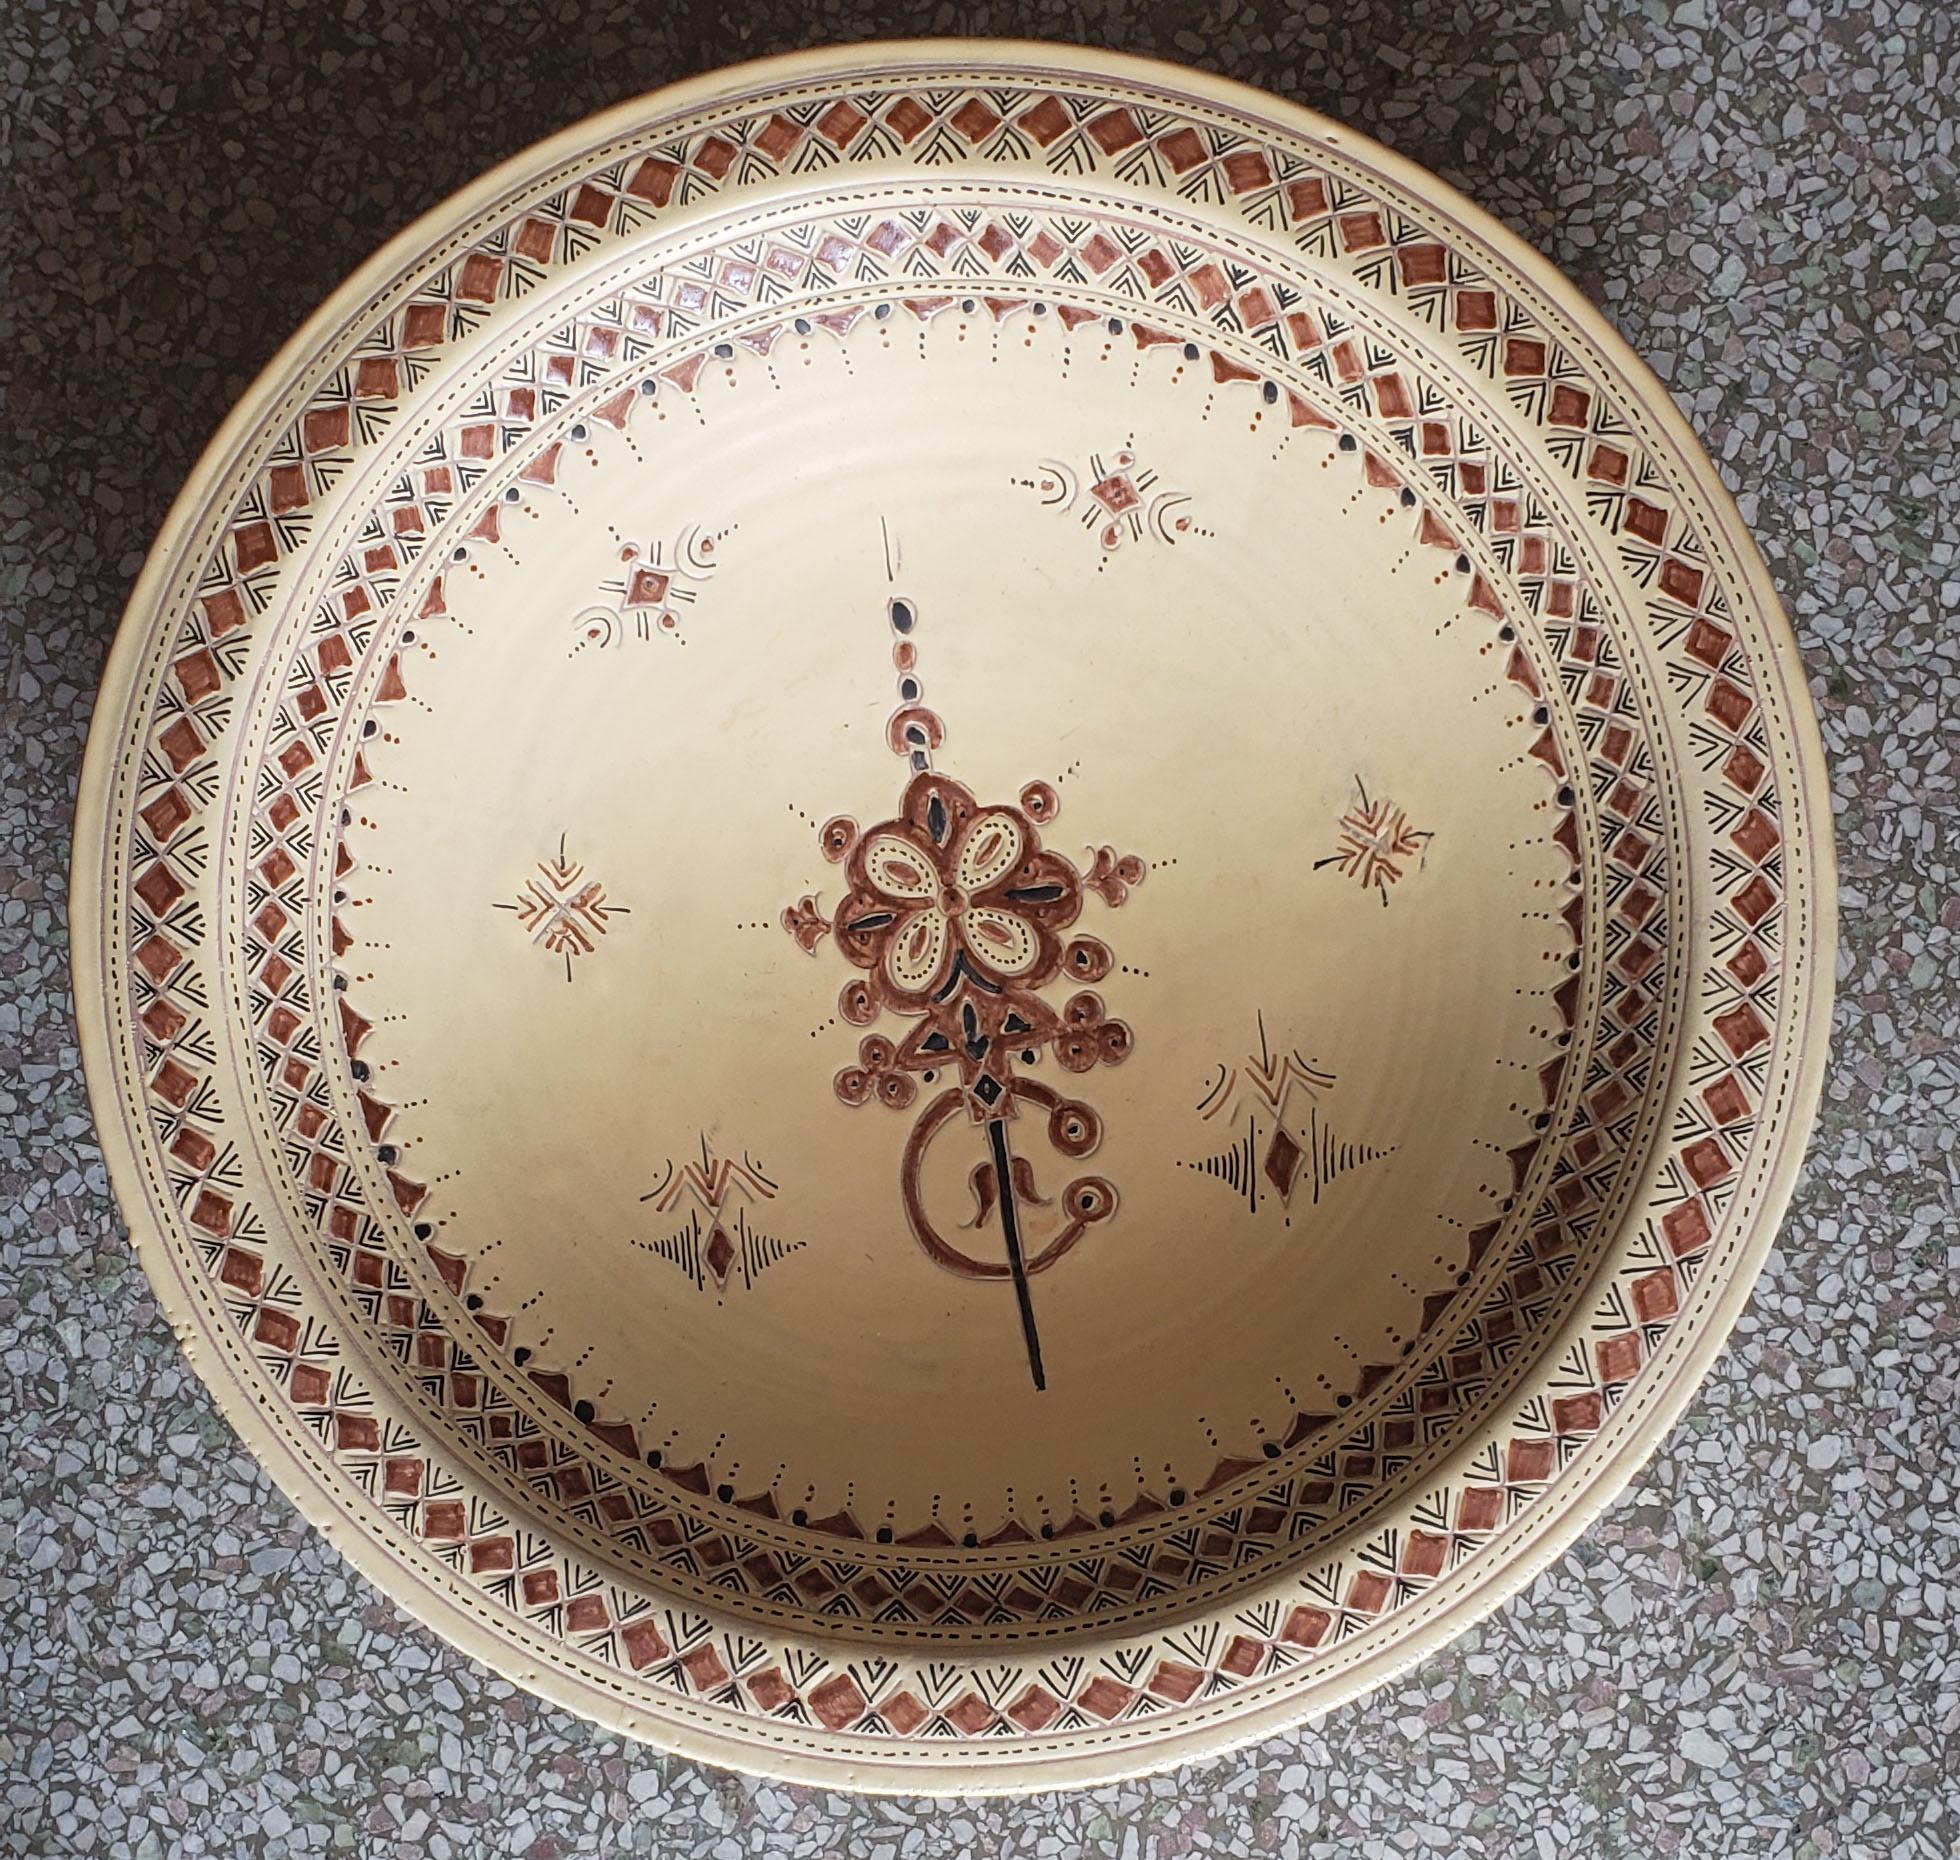 A rare or one of a kind exquisite Moroccan plate / charger for decoration purpose only. This plate is hand-painted in beige and brown. This plate would be a great add-on to any decor. Great Handcraftsmanship and precision, featuring the famous